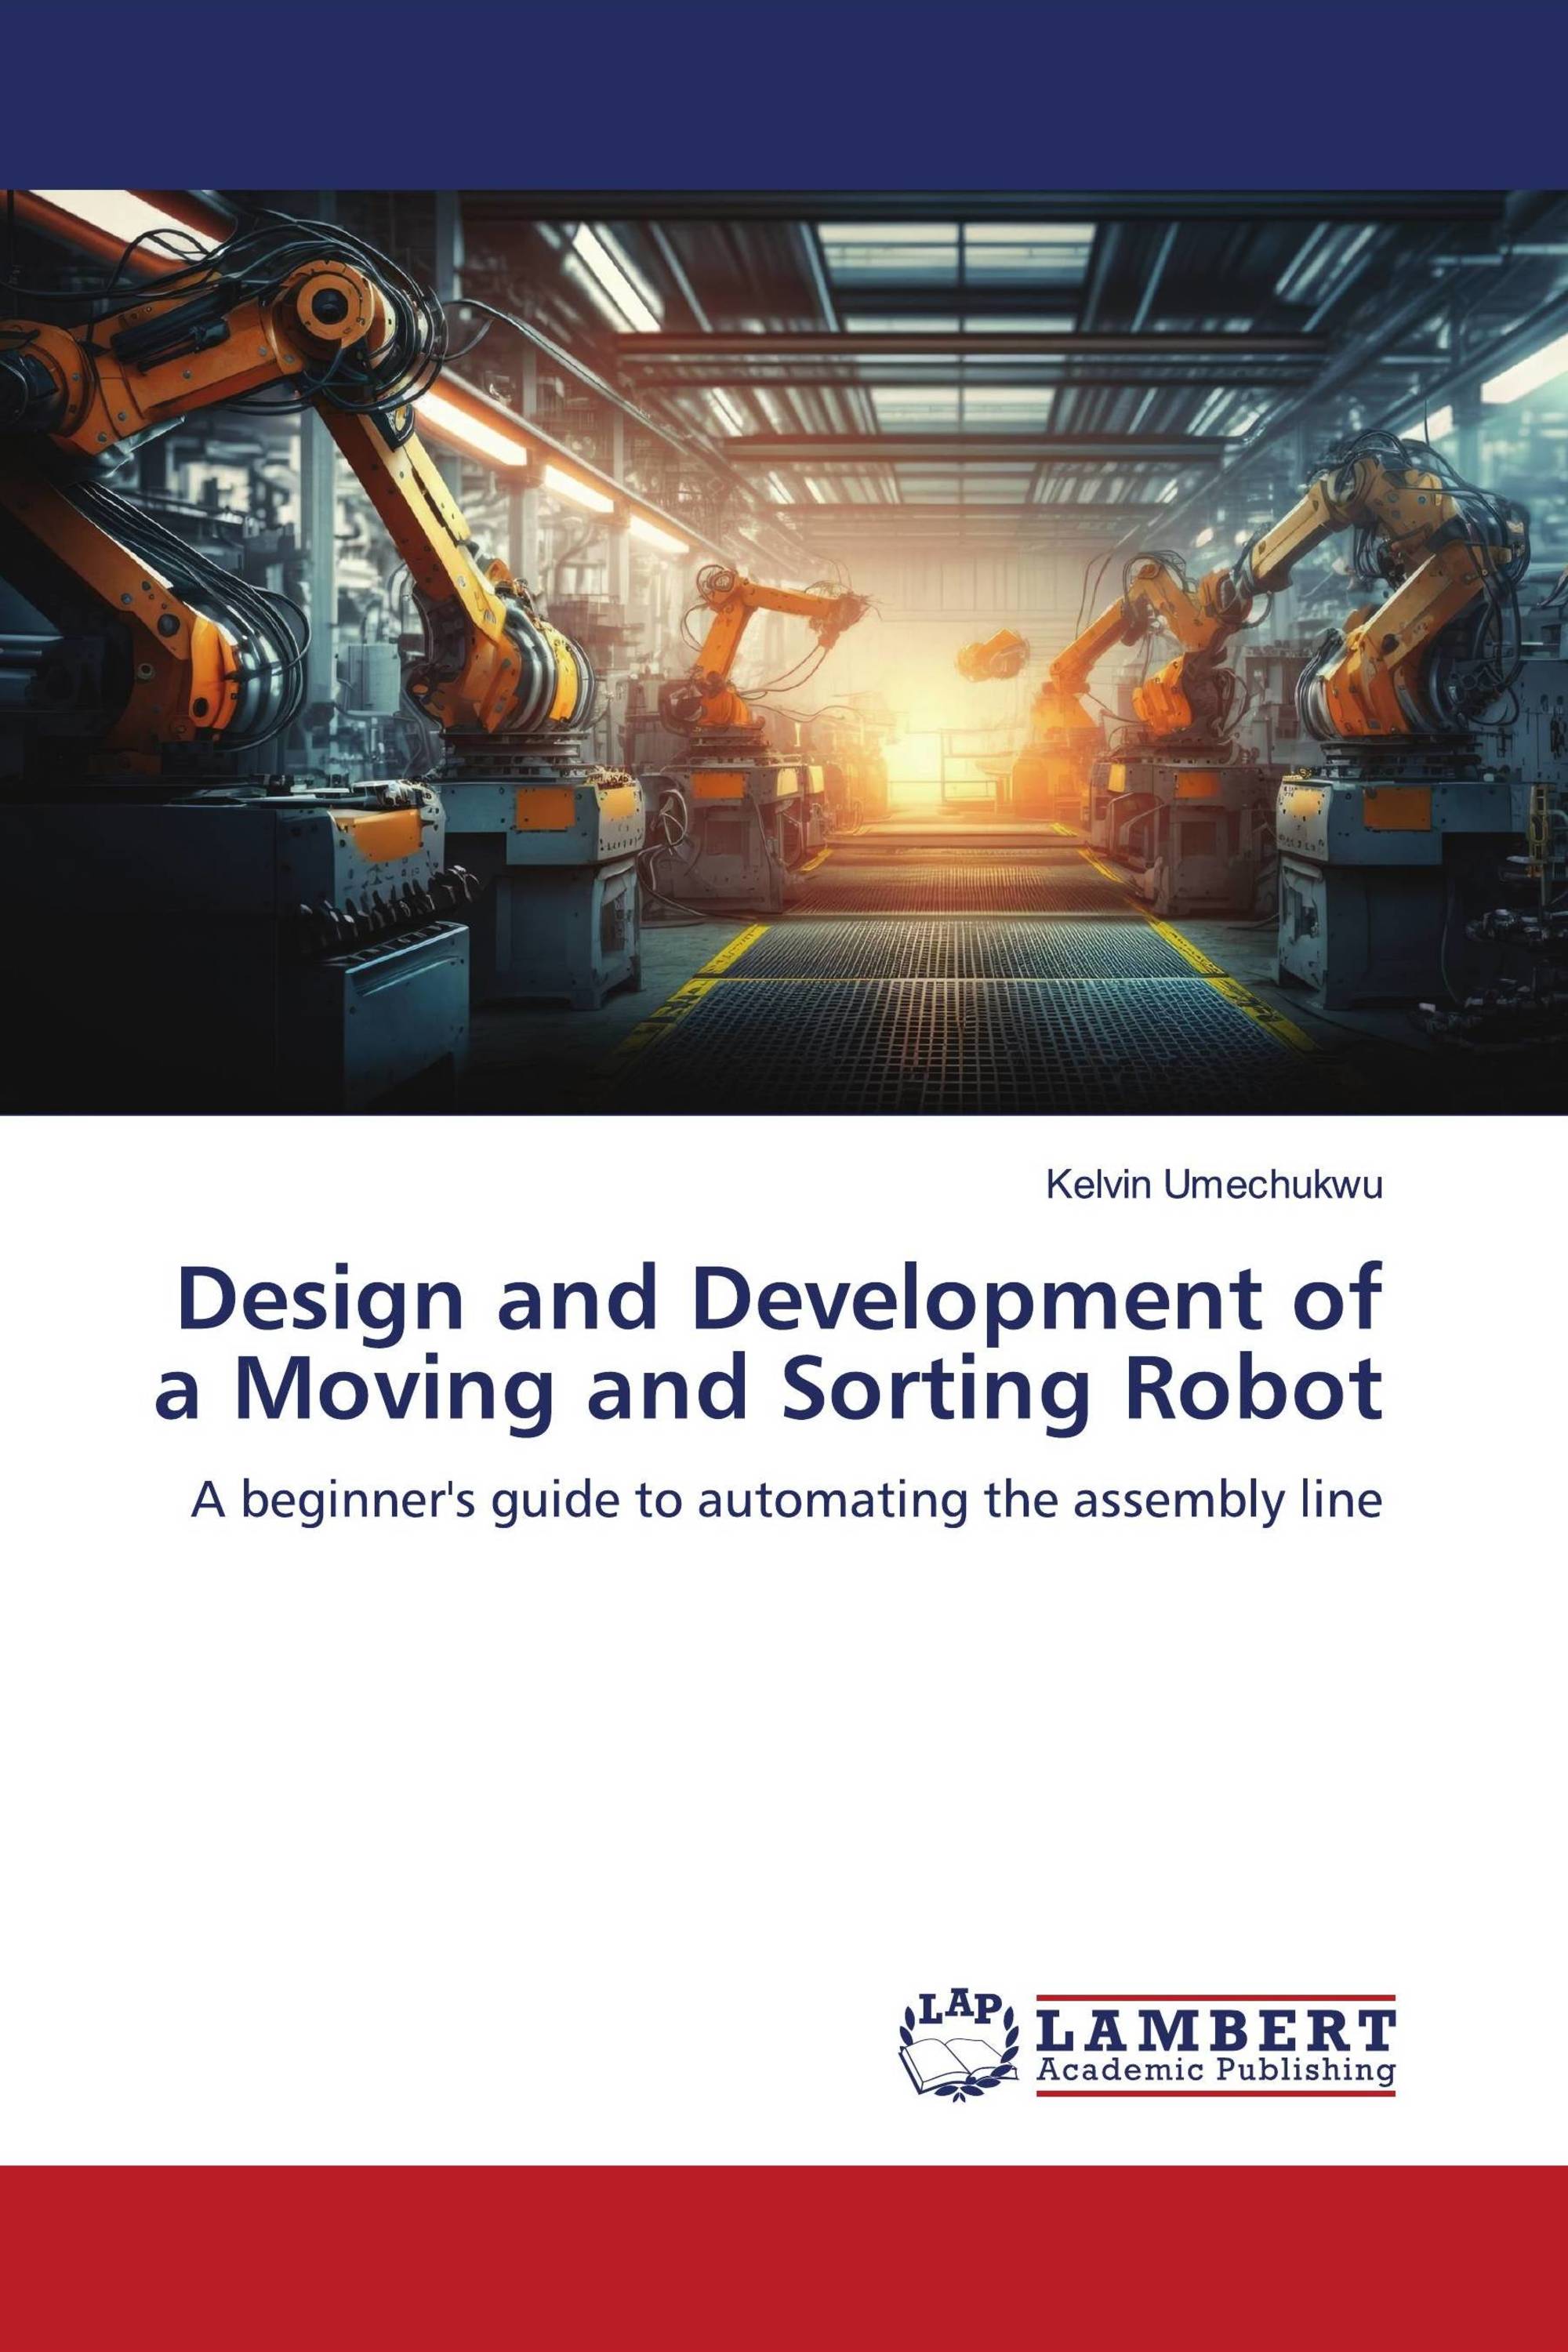 Design and Development of a Moving and Sorting Robot